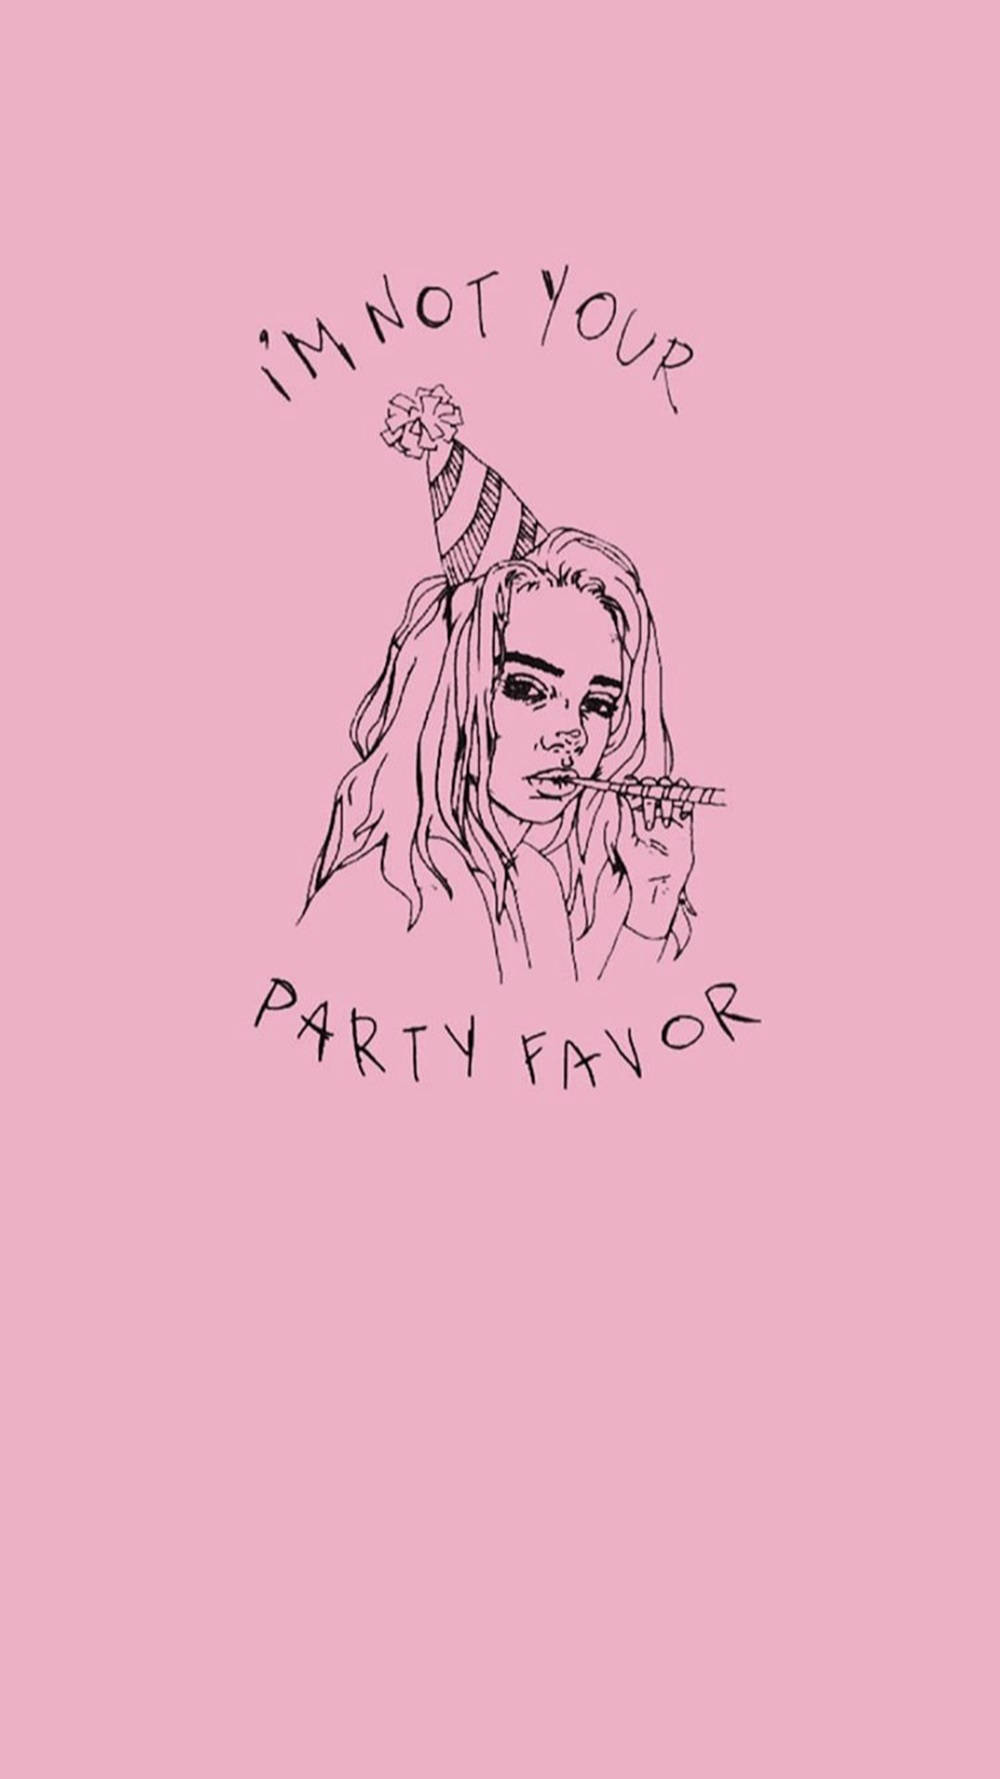 Aesthetic Billie Eilish Pink Aesthetic Party Favor Background